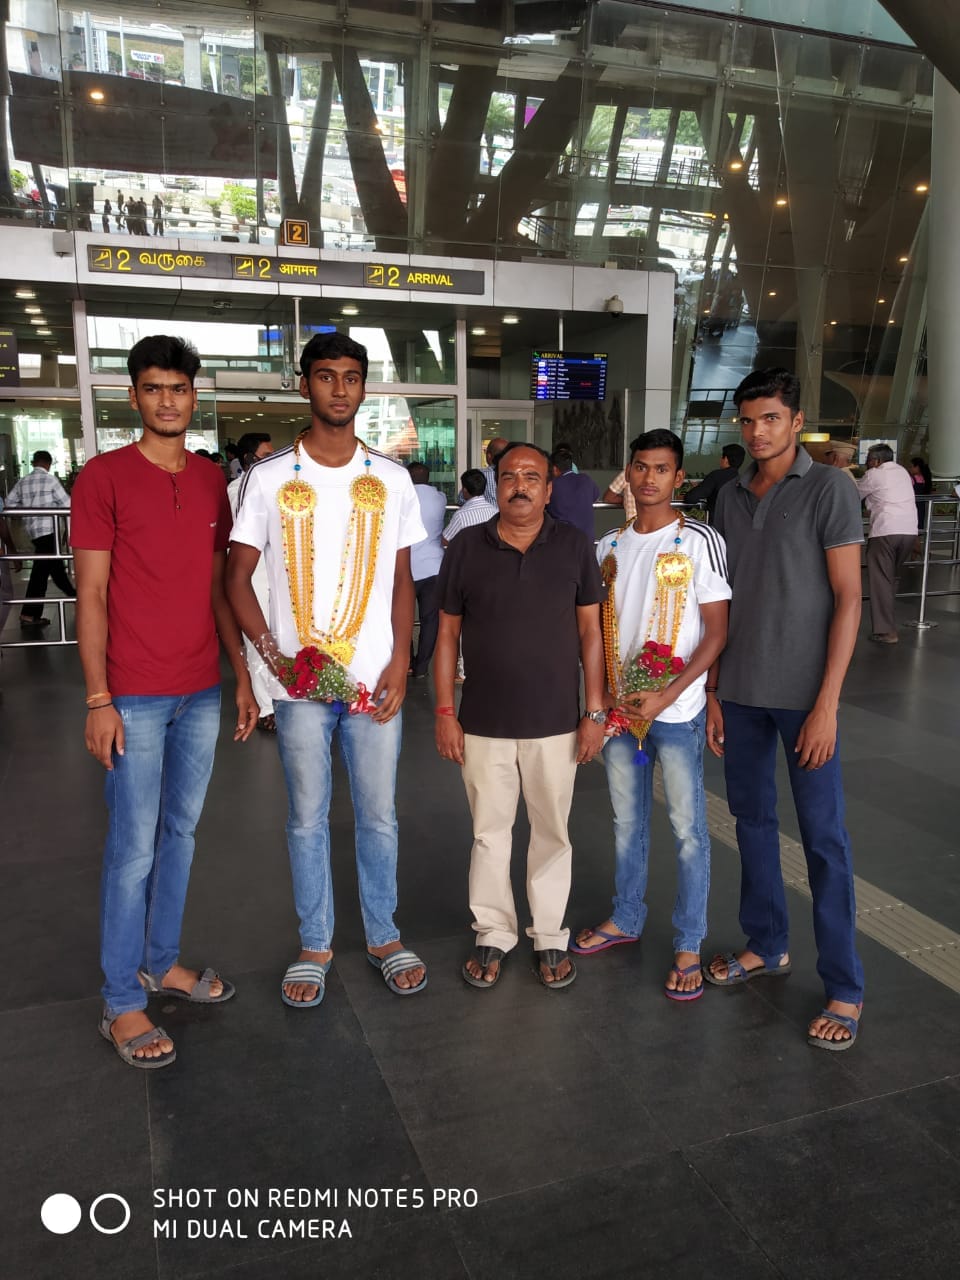 Sundaresan with S. V. Guru Prasanth and Srikanth, two players from the Indian U-21 Volleyball team in Asian U21 Championship at Bahrain (Source: Facebook)